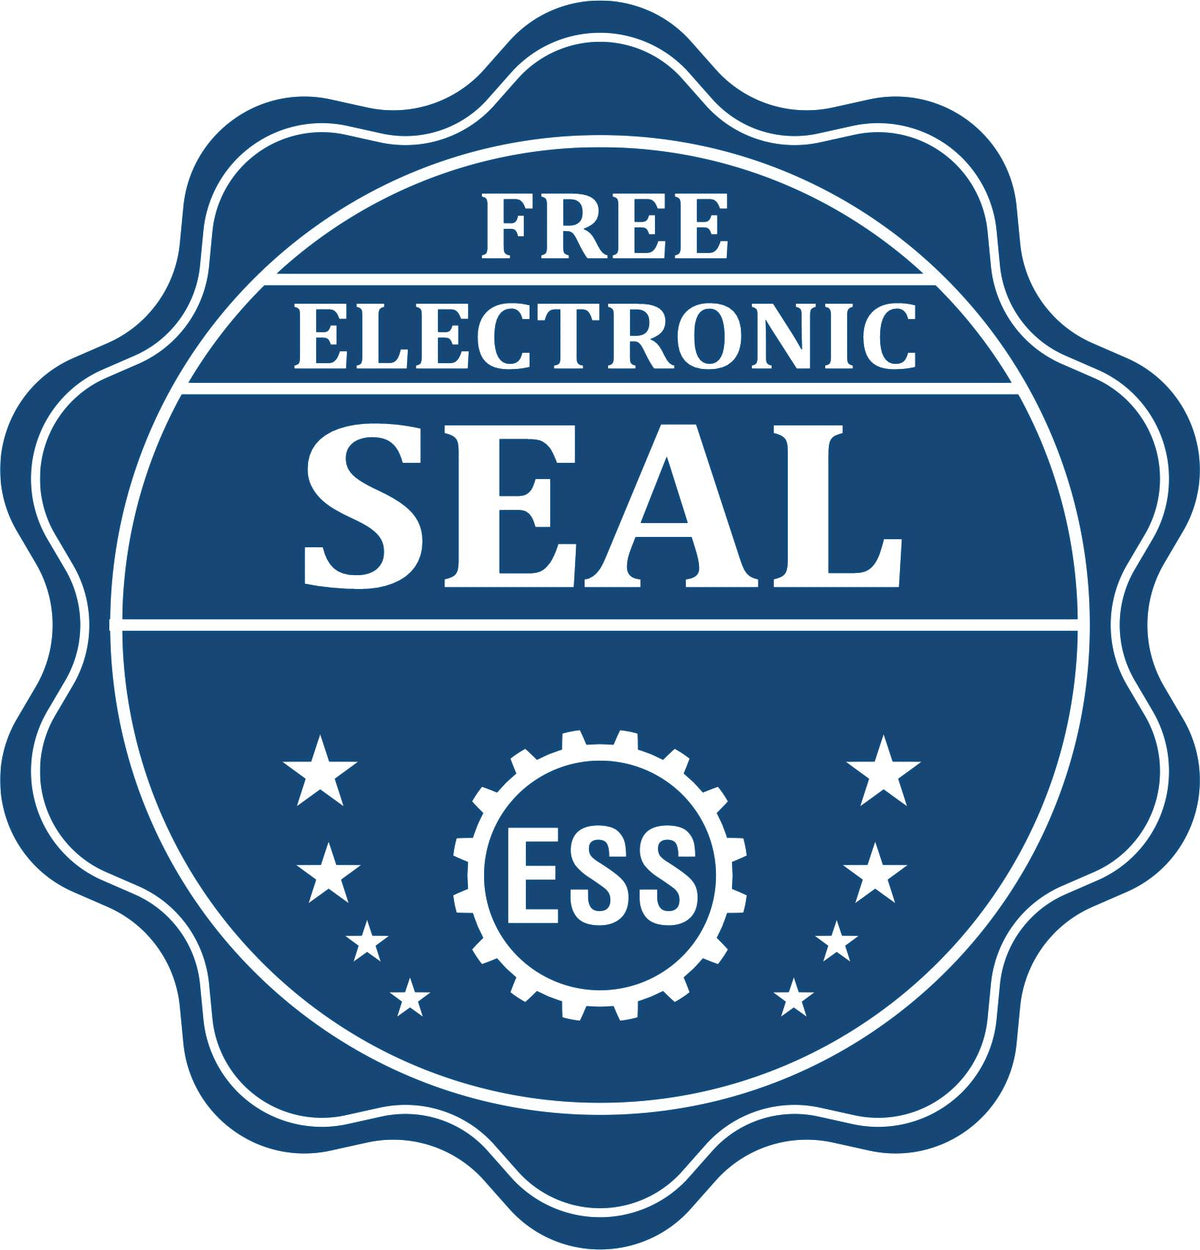 A badge showing a free electronic seal for the Slim Pre-Inked State Seal Notary Stamp for Ohio with stars and the ESS gear on the emblem.